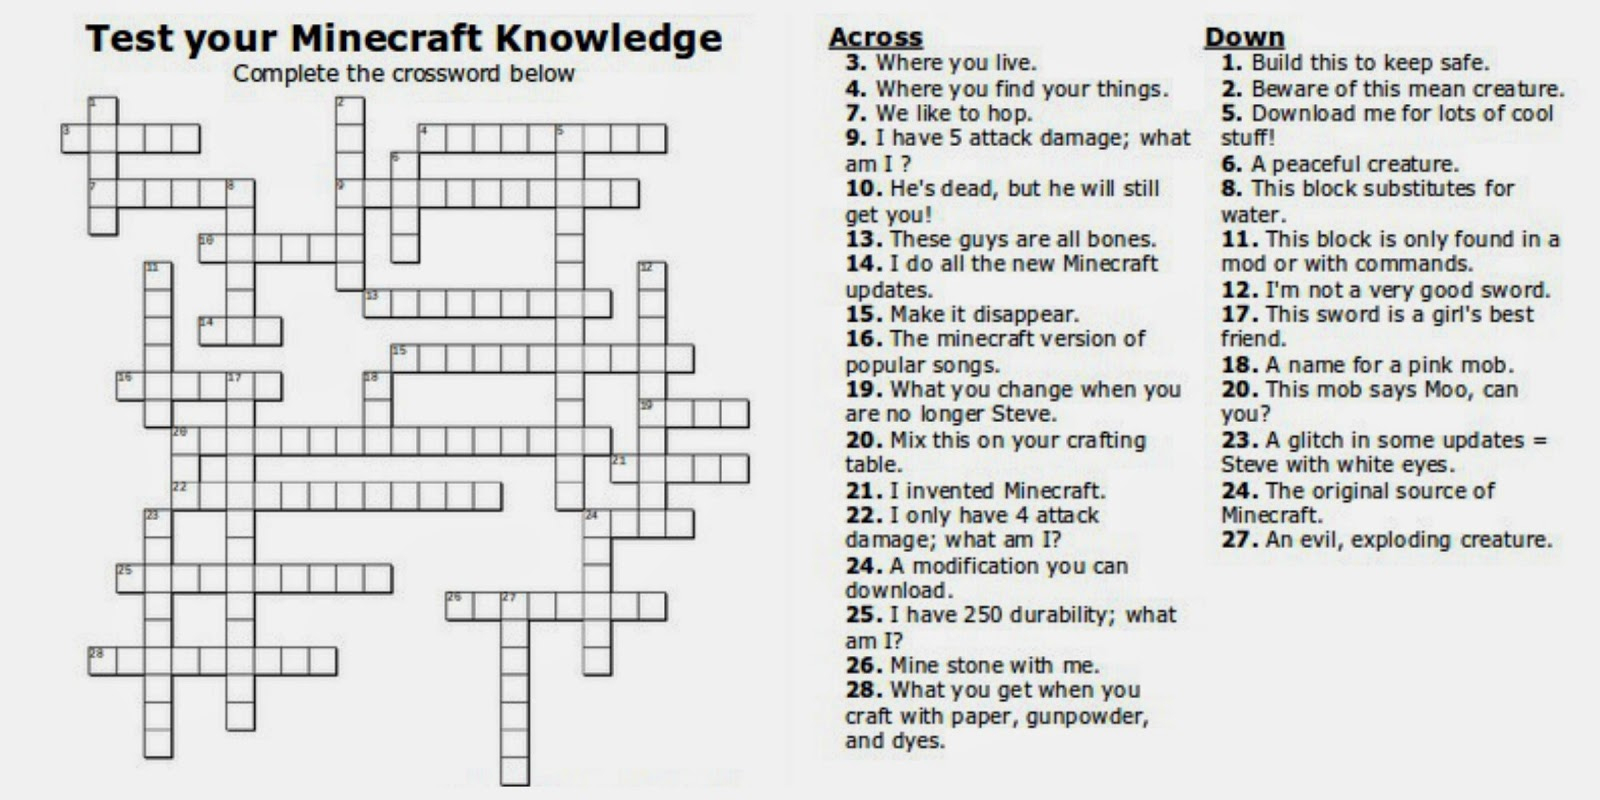 Free Printable Minecraft Crossword Search: Test Your Minecraft - Make Your Own Crossword Puzzle Free Printable With Answer Key